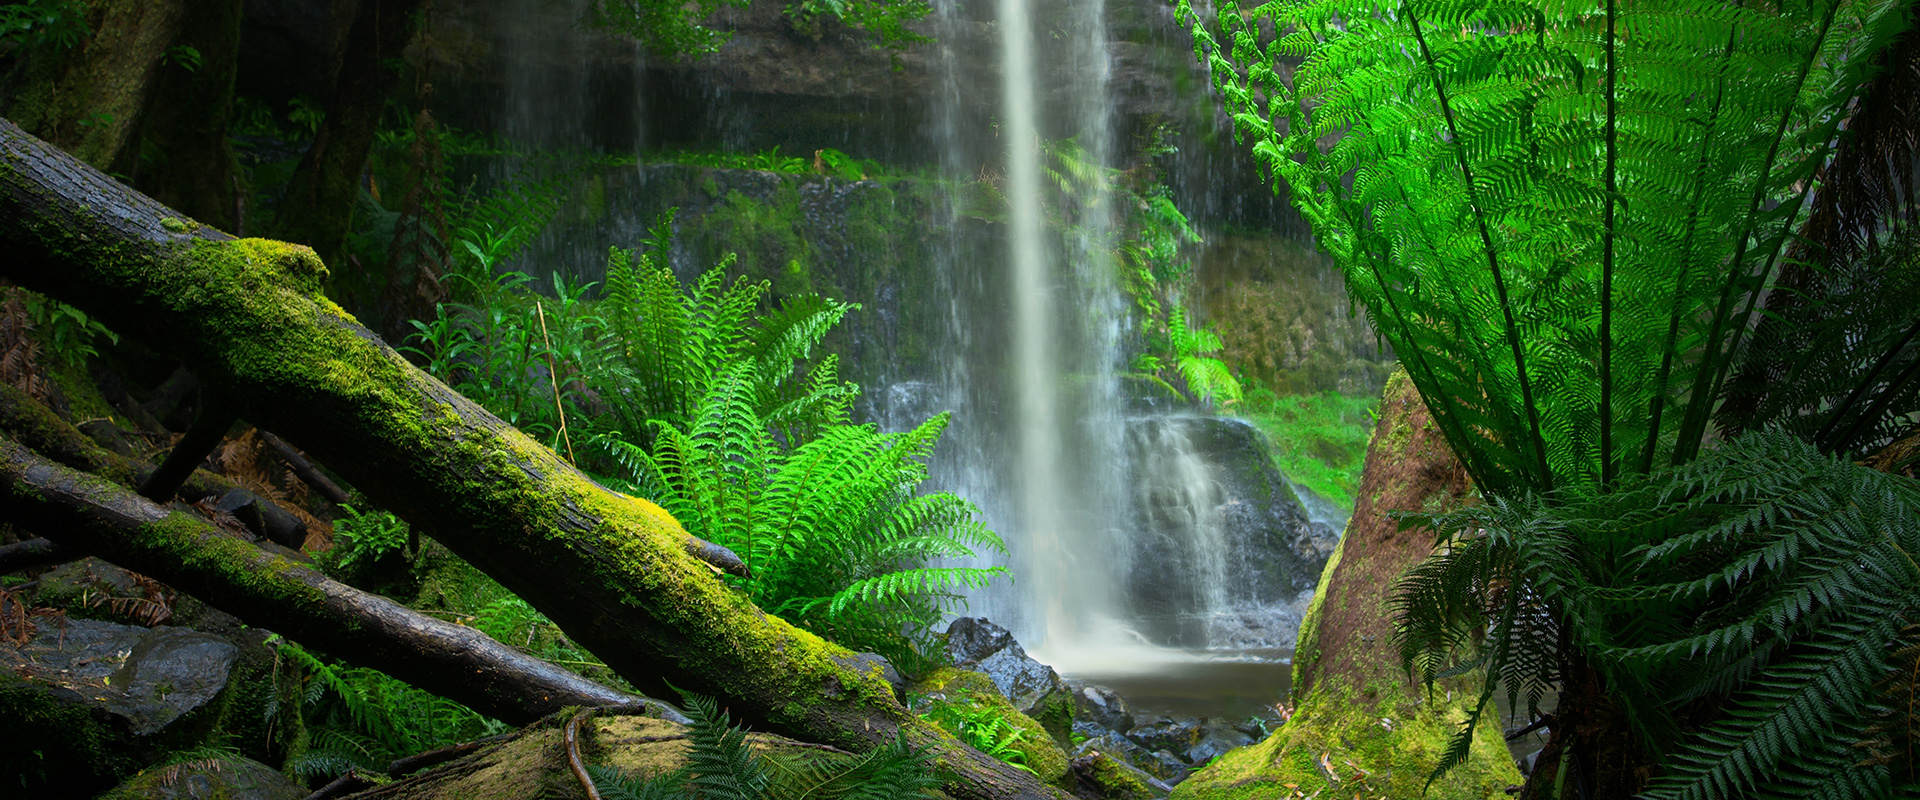 Take in the incredible tranquility of Tasmania's Russell Falls